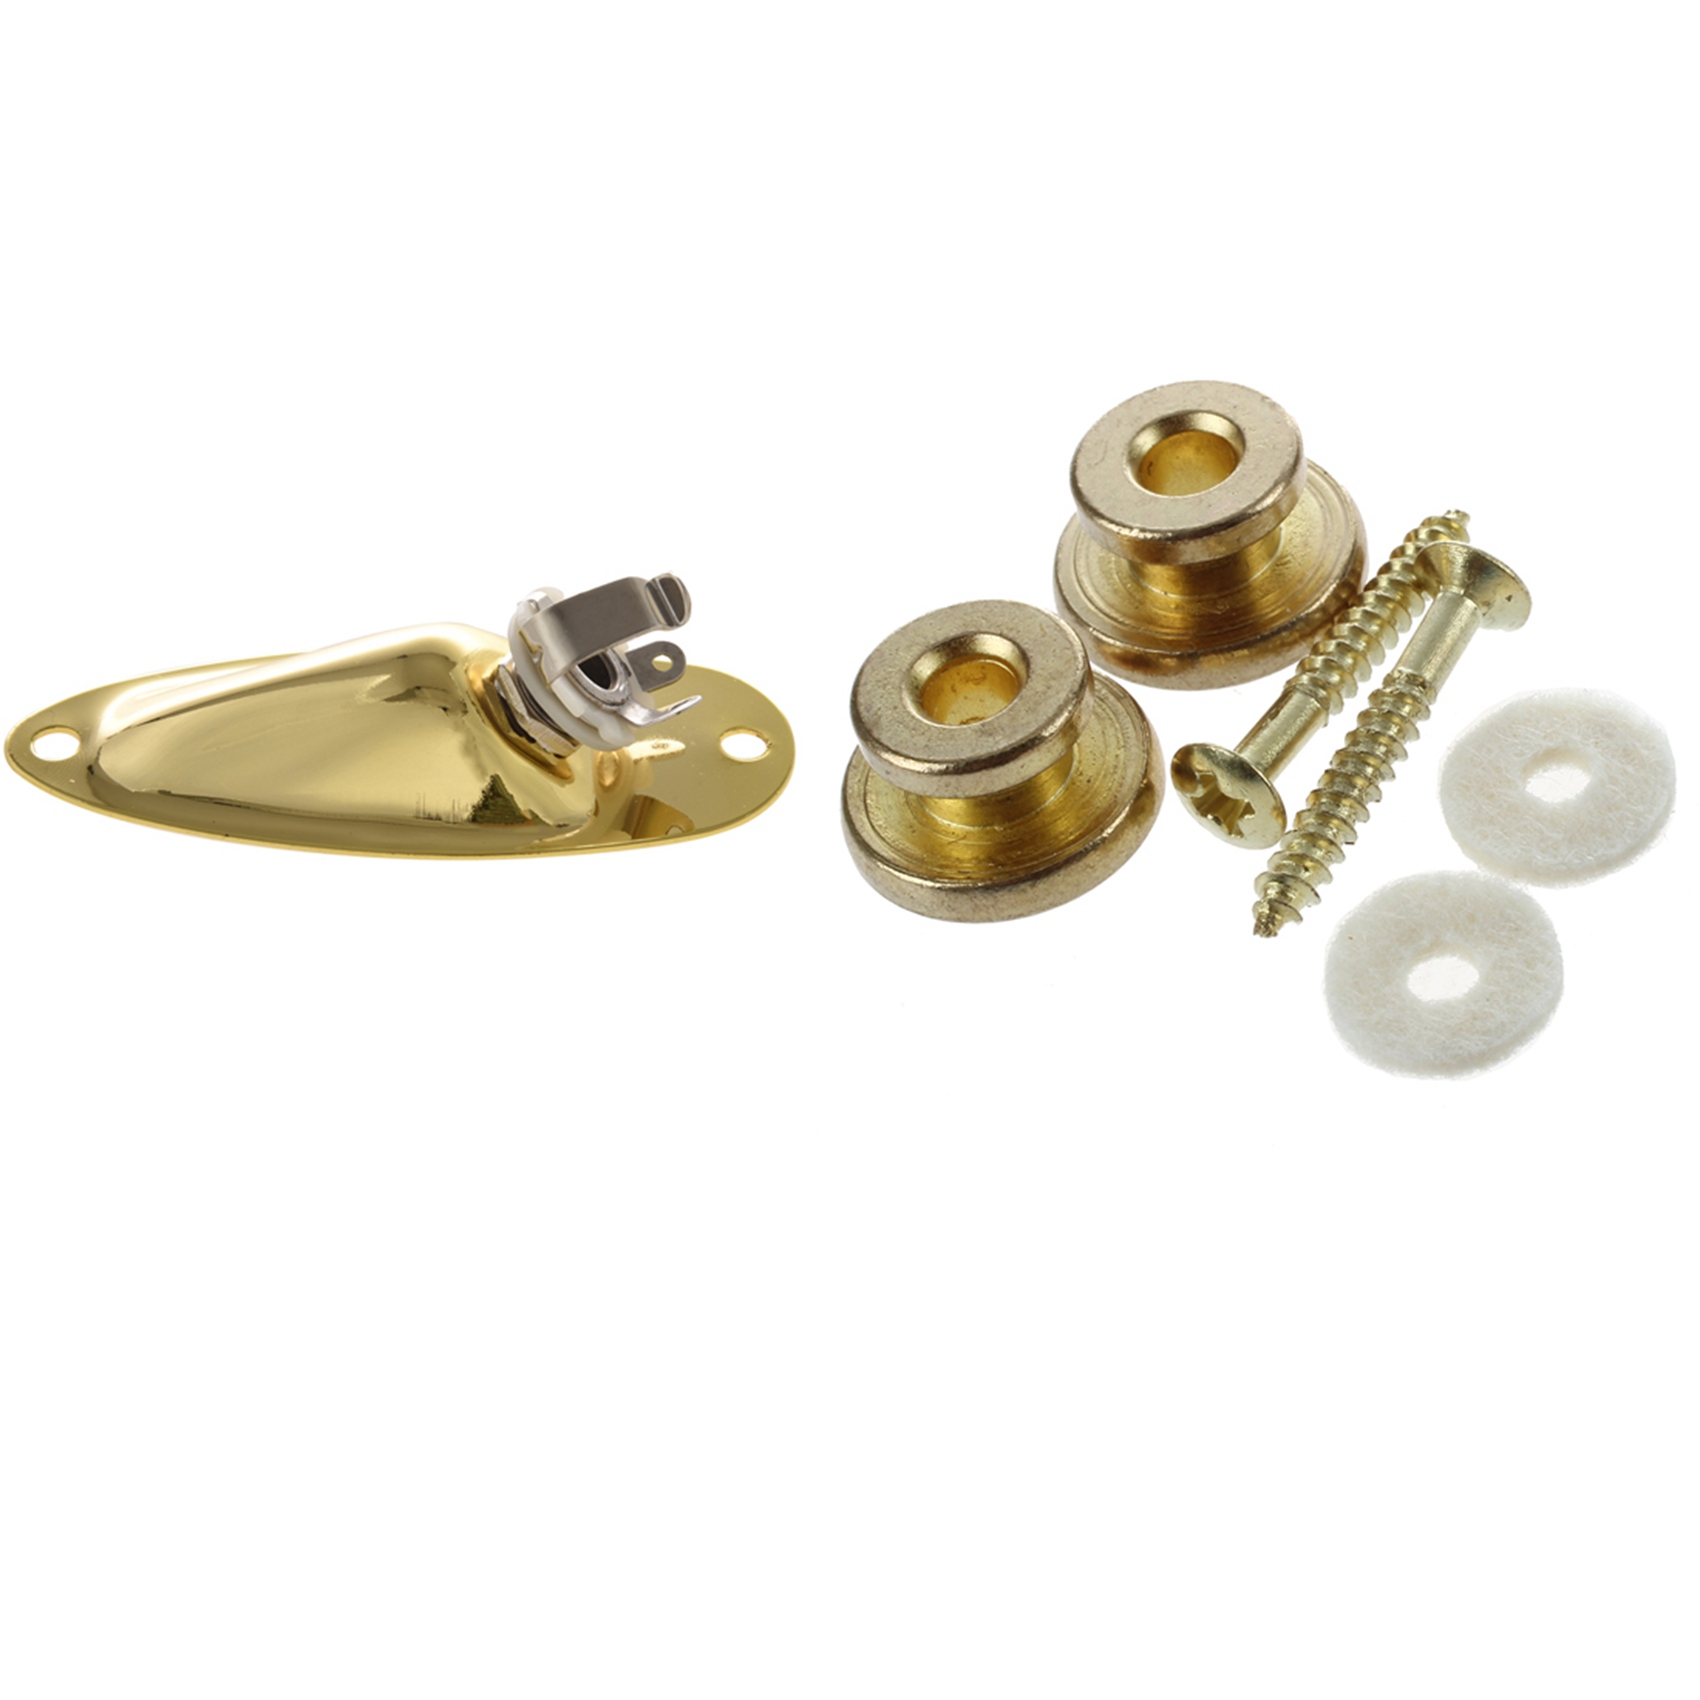 2Pcs Golden Strap Button with Mounting Screw for Guitar Mandolin & 1Pcs Boat Output Input Jack Plate Sockets